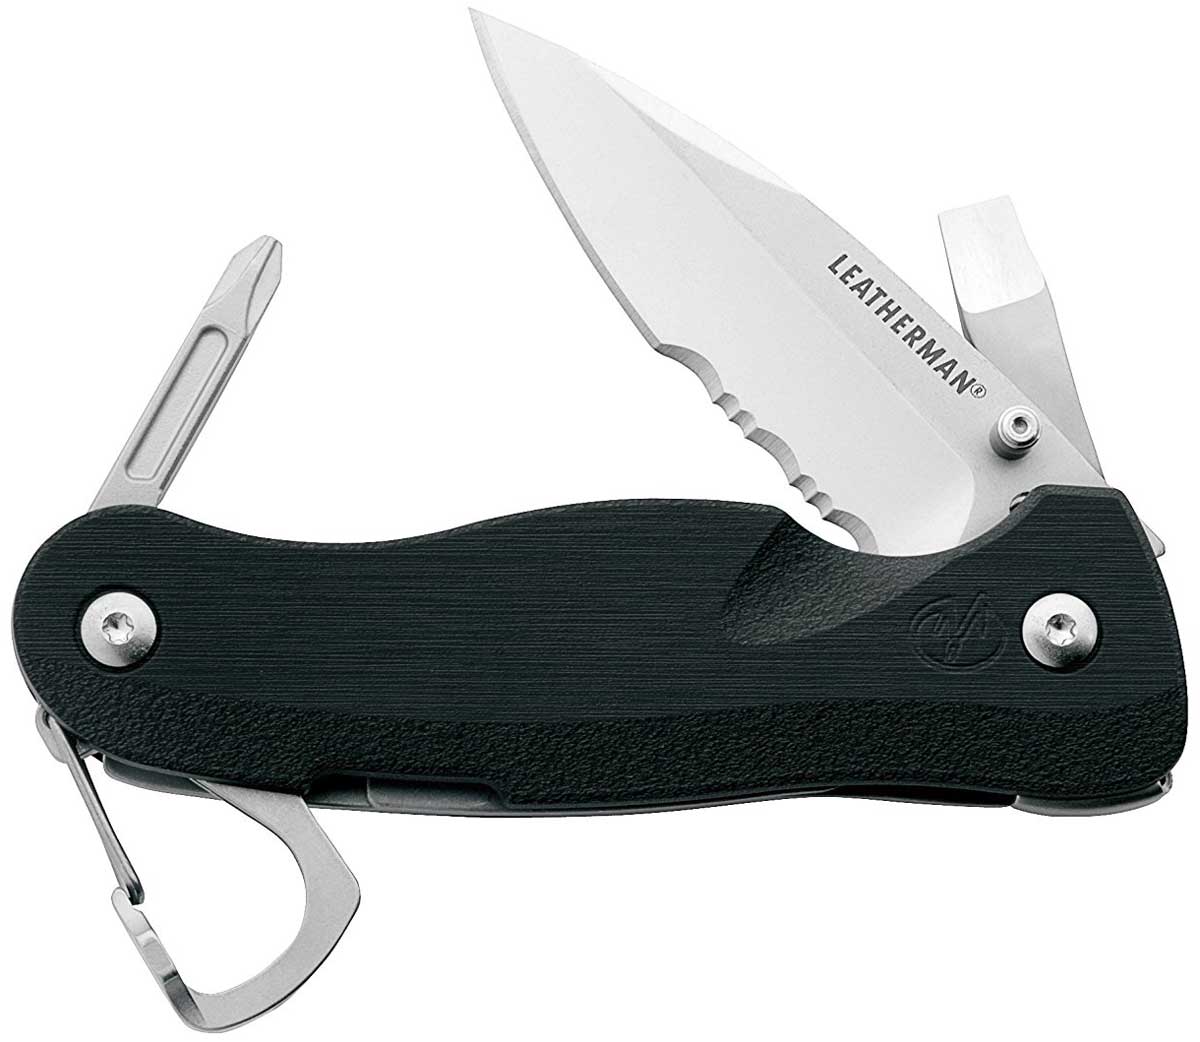 Leatherman Crater C33TX Knife